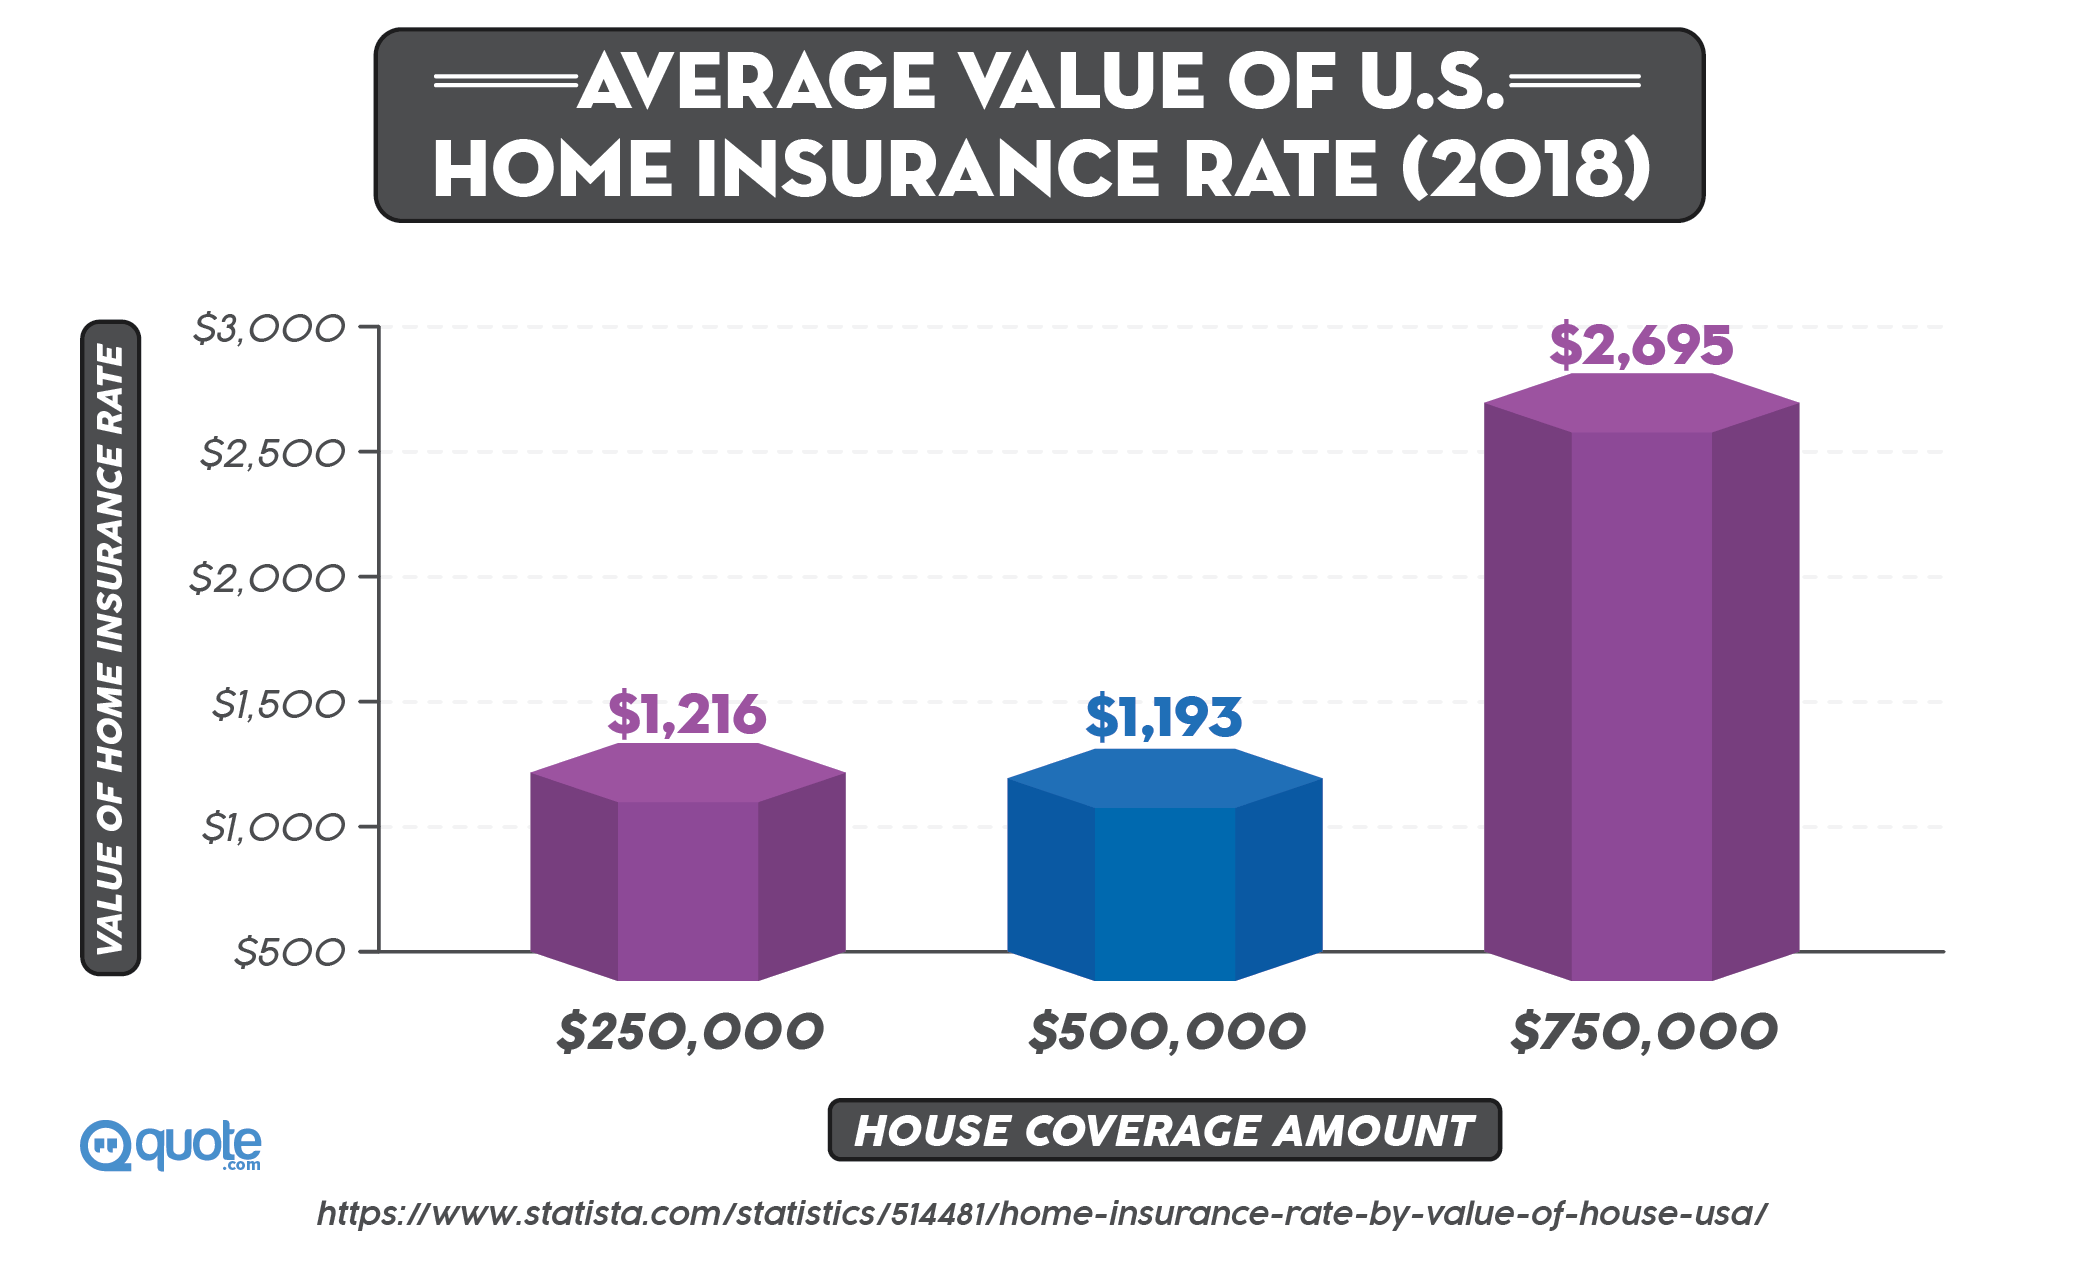 Average Value of U.S. Home Insurance Rate in 2018